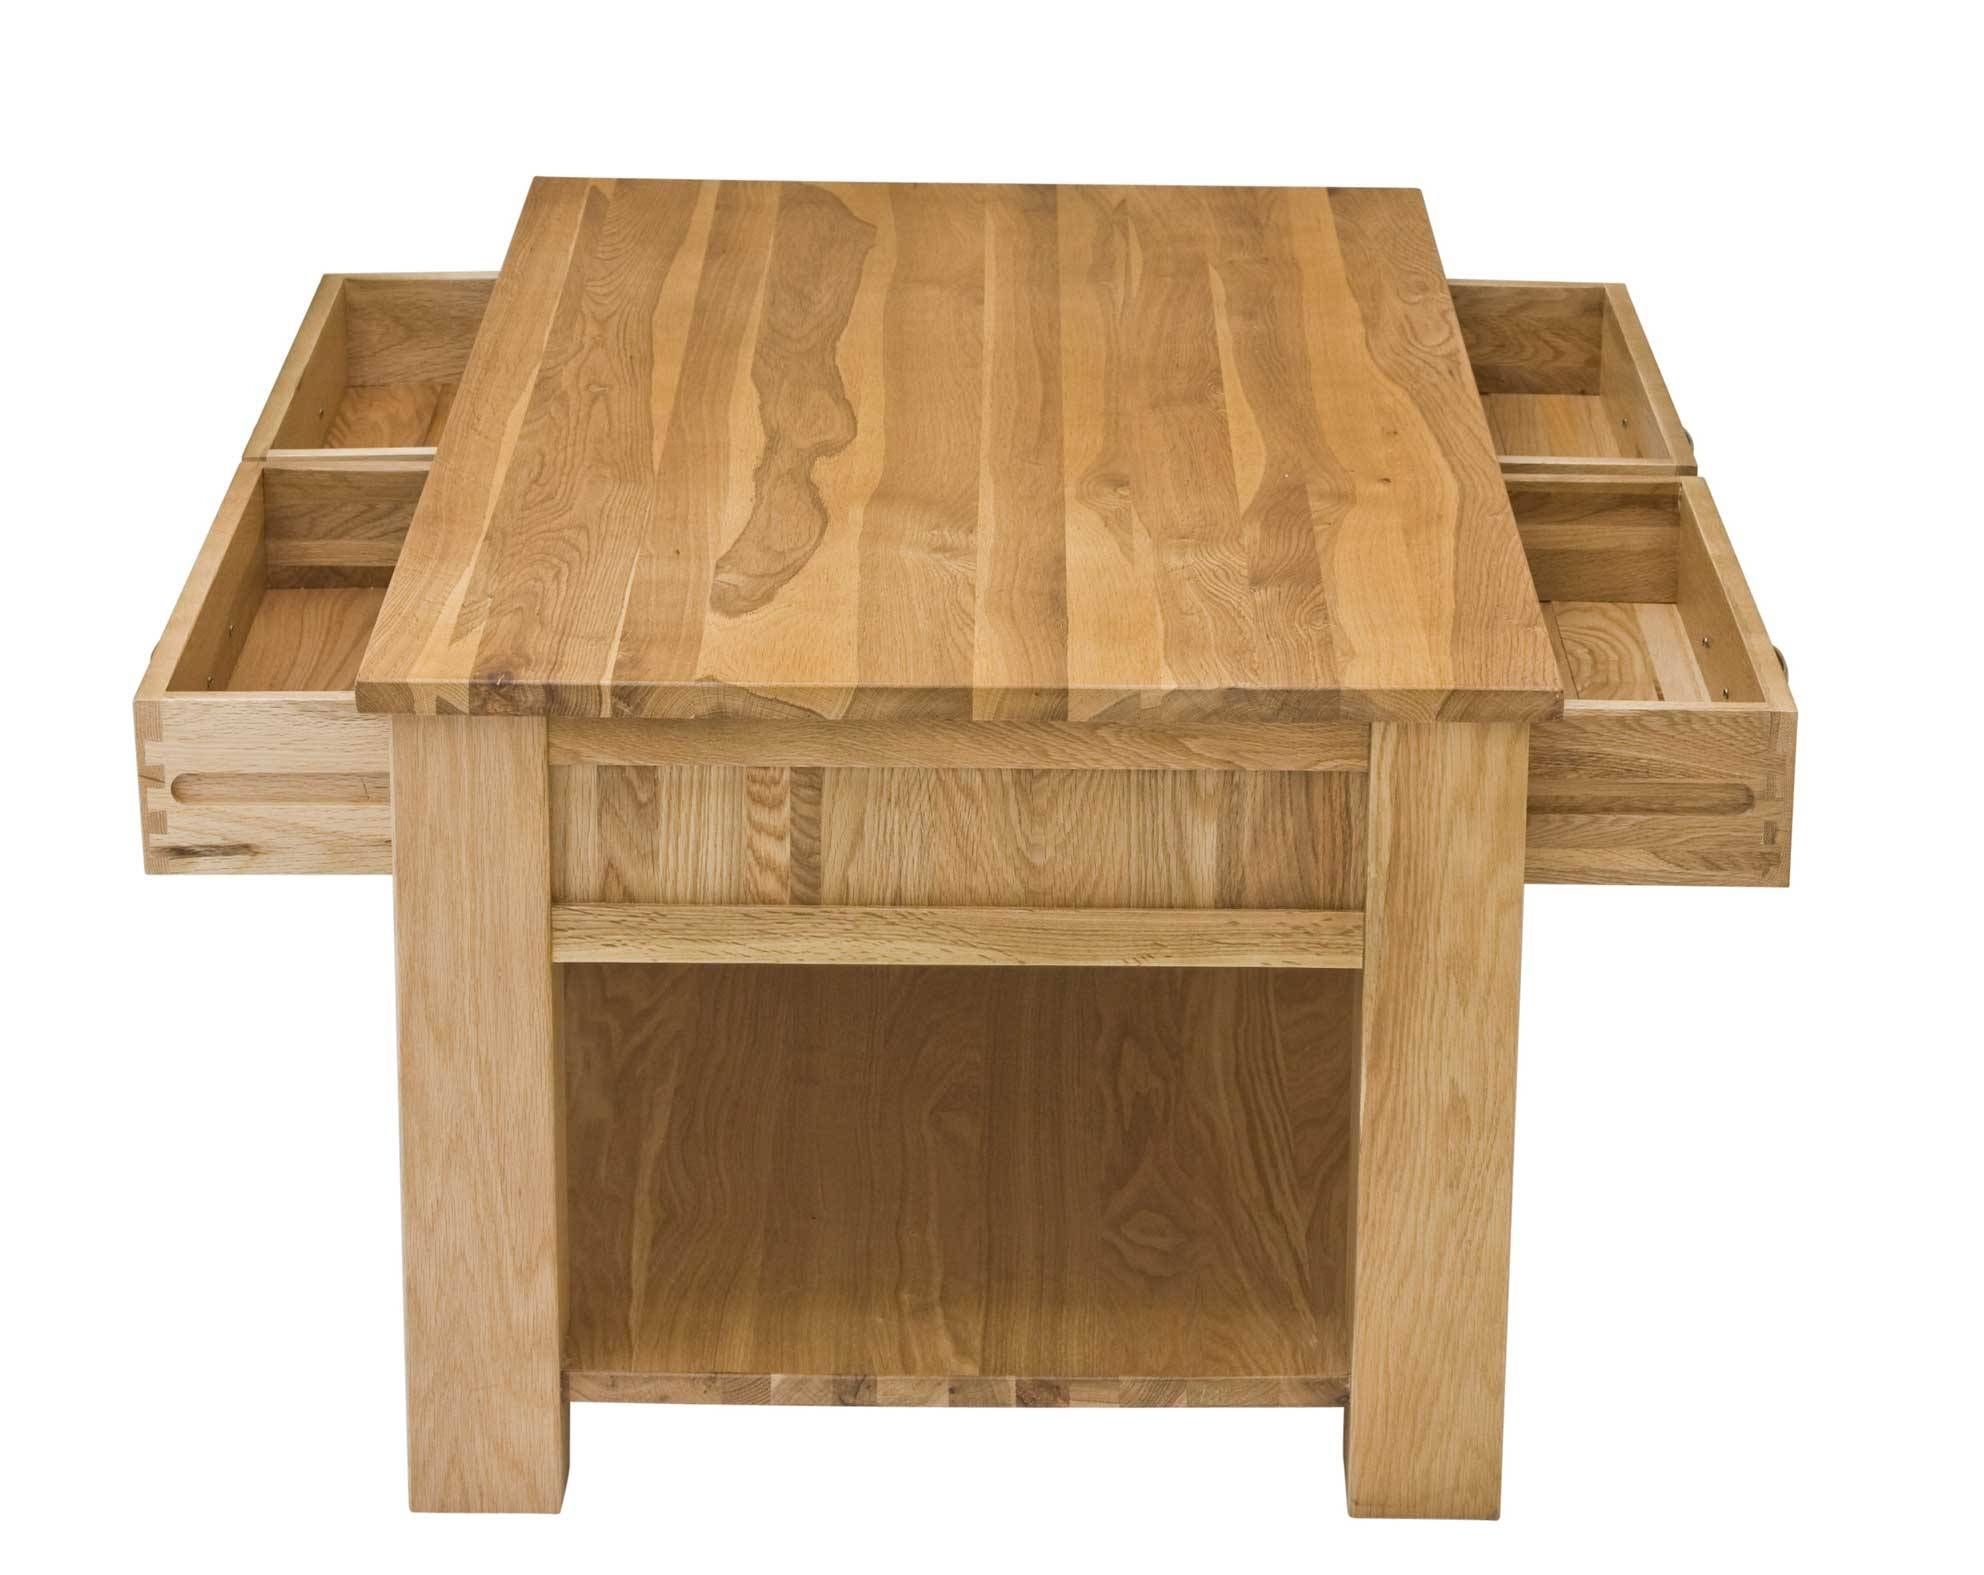 Light Oak Coffee Table With Drawers / Coffee Tables / Thippo Throughout Light Oak Coffee Tables With Drawers (View 7 of 30)